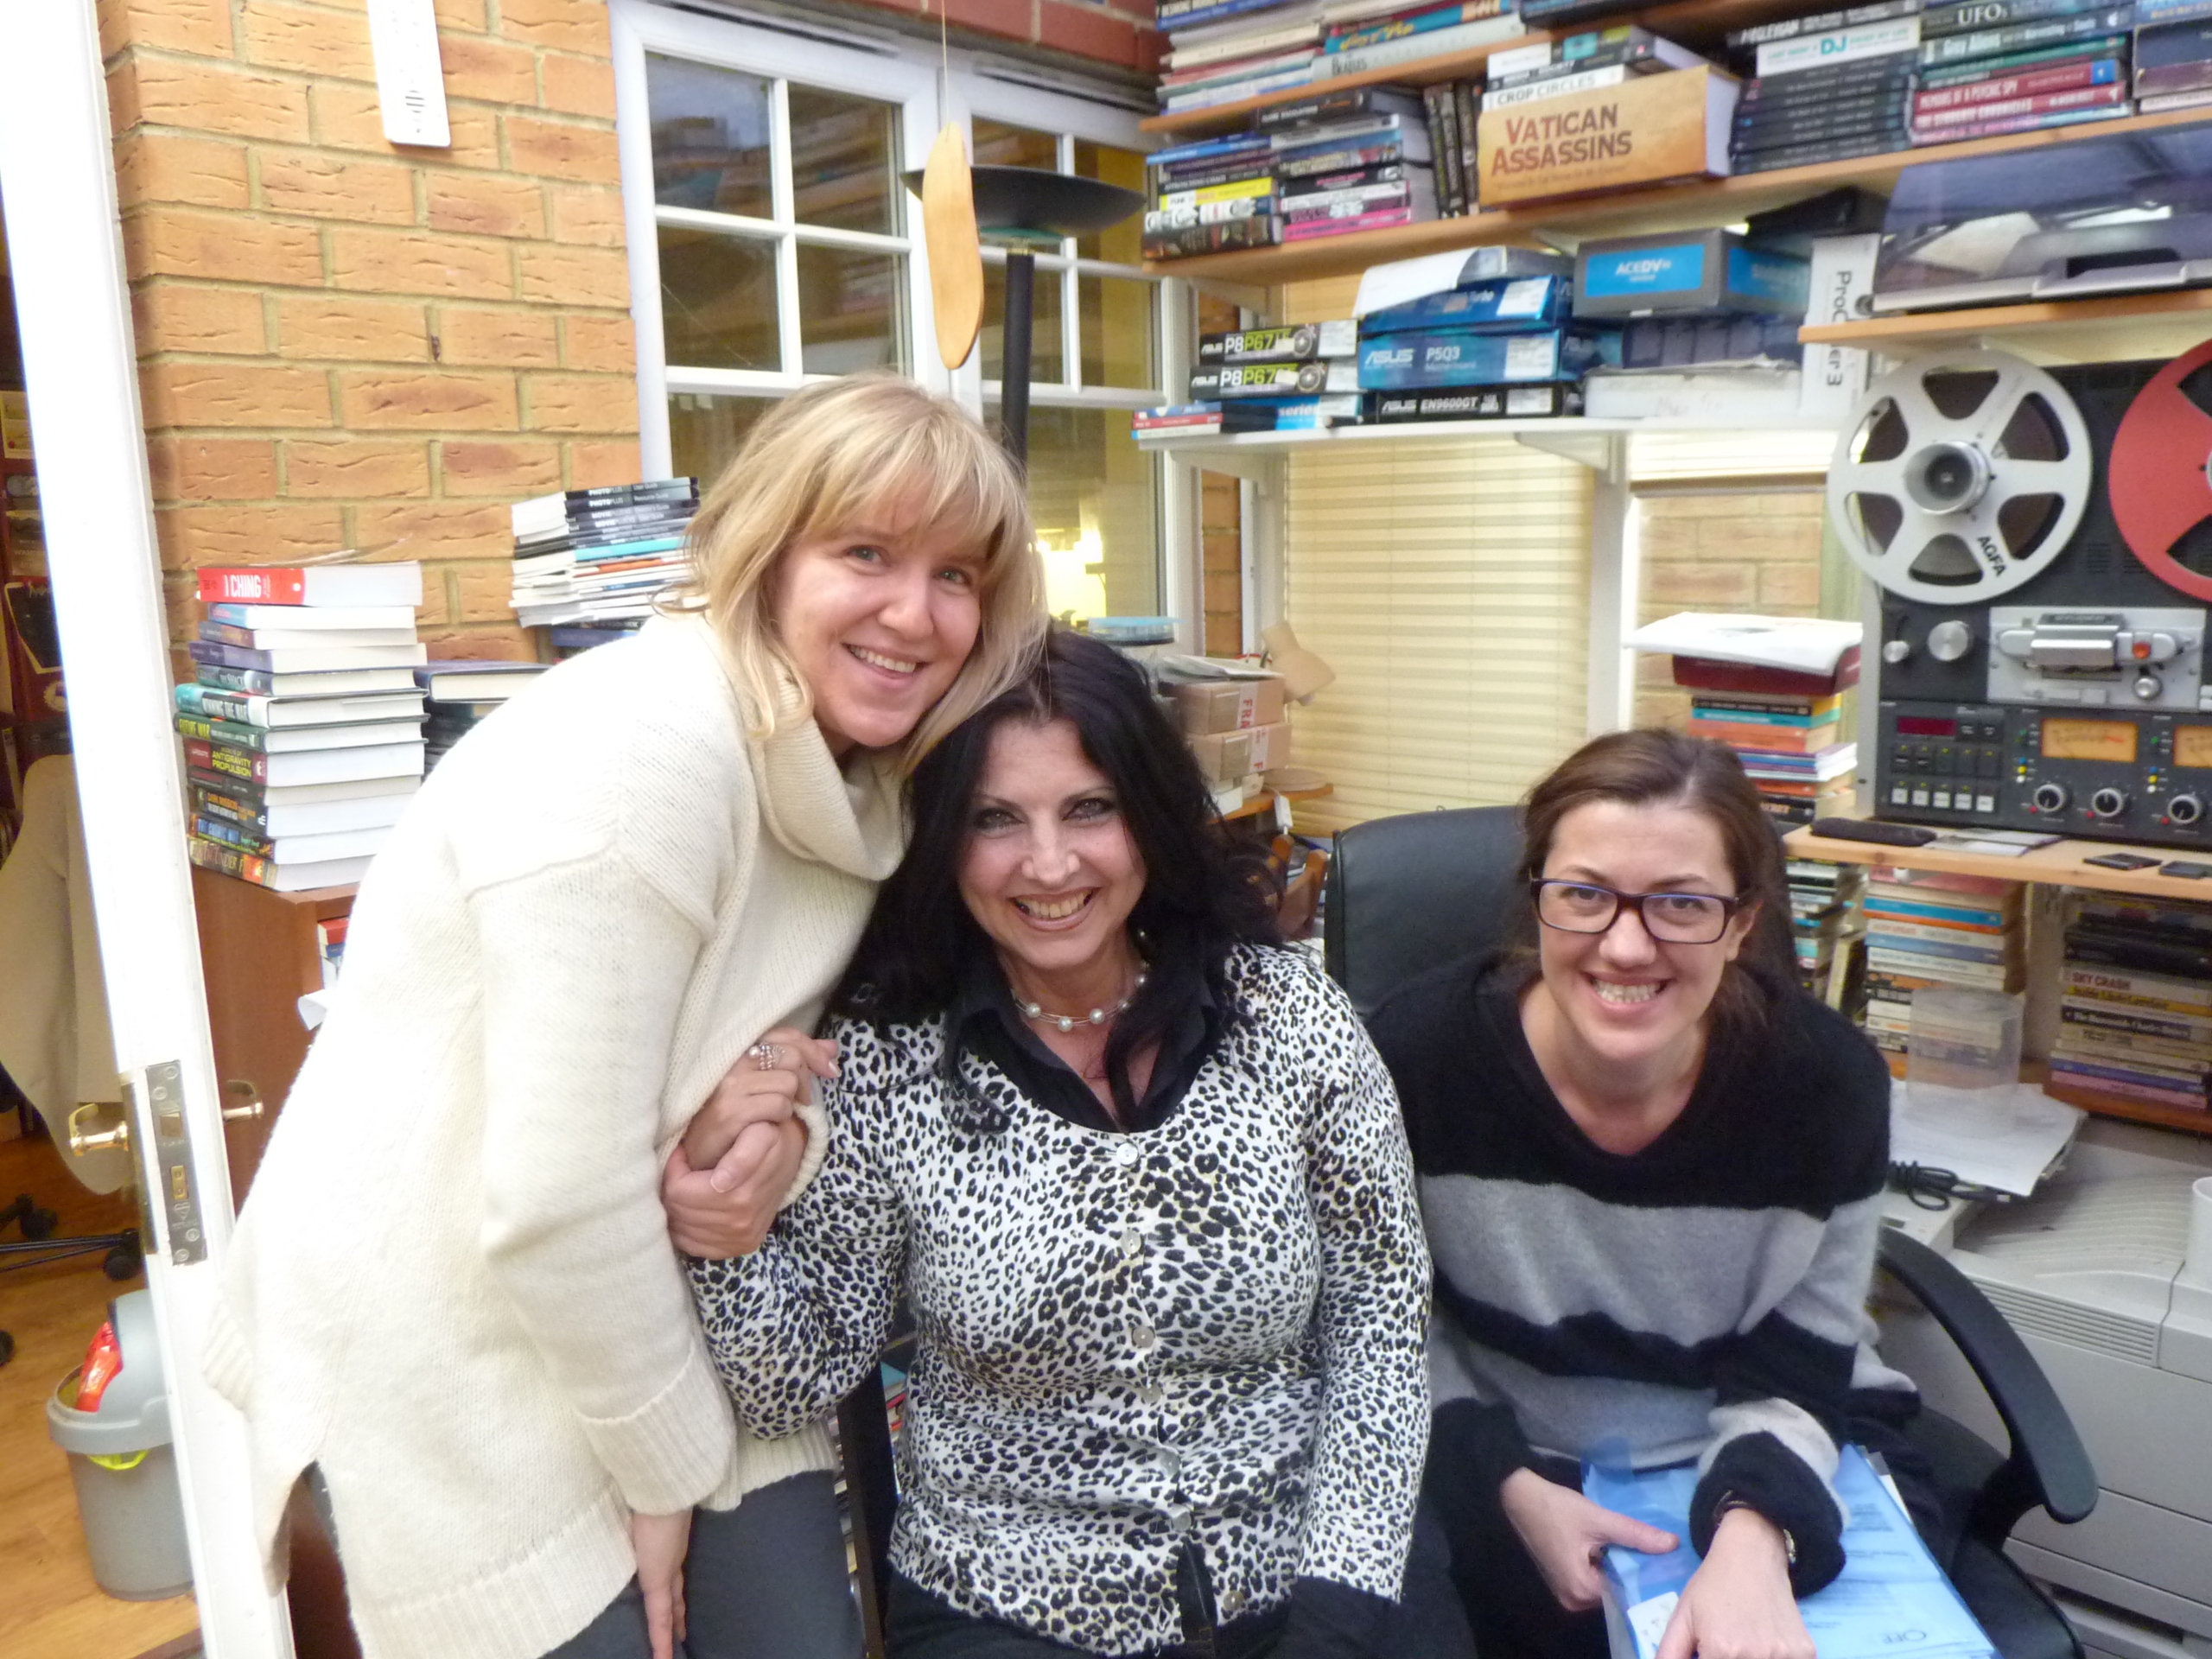 The UK Channel 4 network became interested in the AMMACH witnesses, and commissioned Off The Fence to make a documentary on the project in Dec 2012. Celine, Joanne and Jayne pose in Miles Johnston edit suite in west London